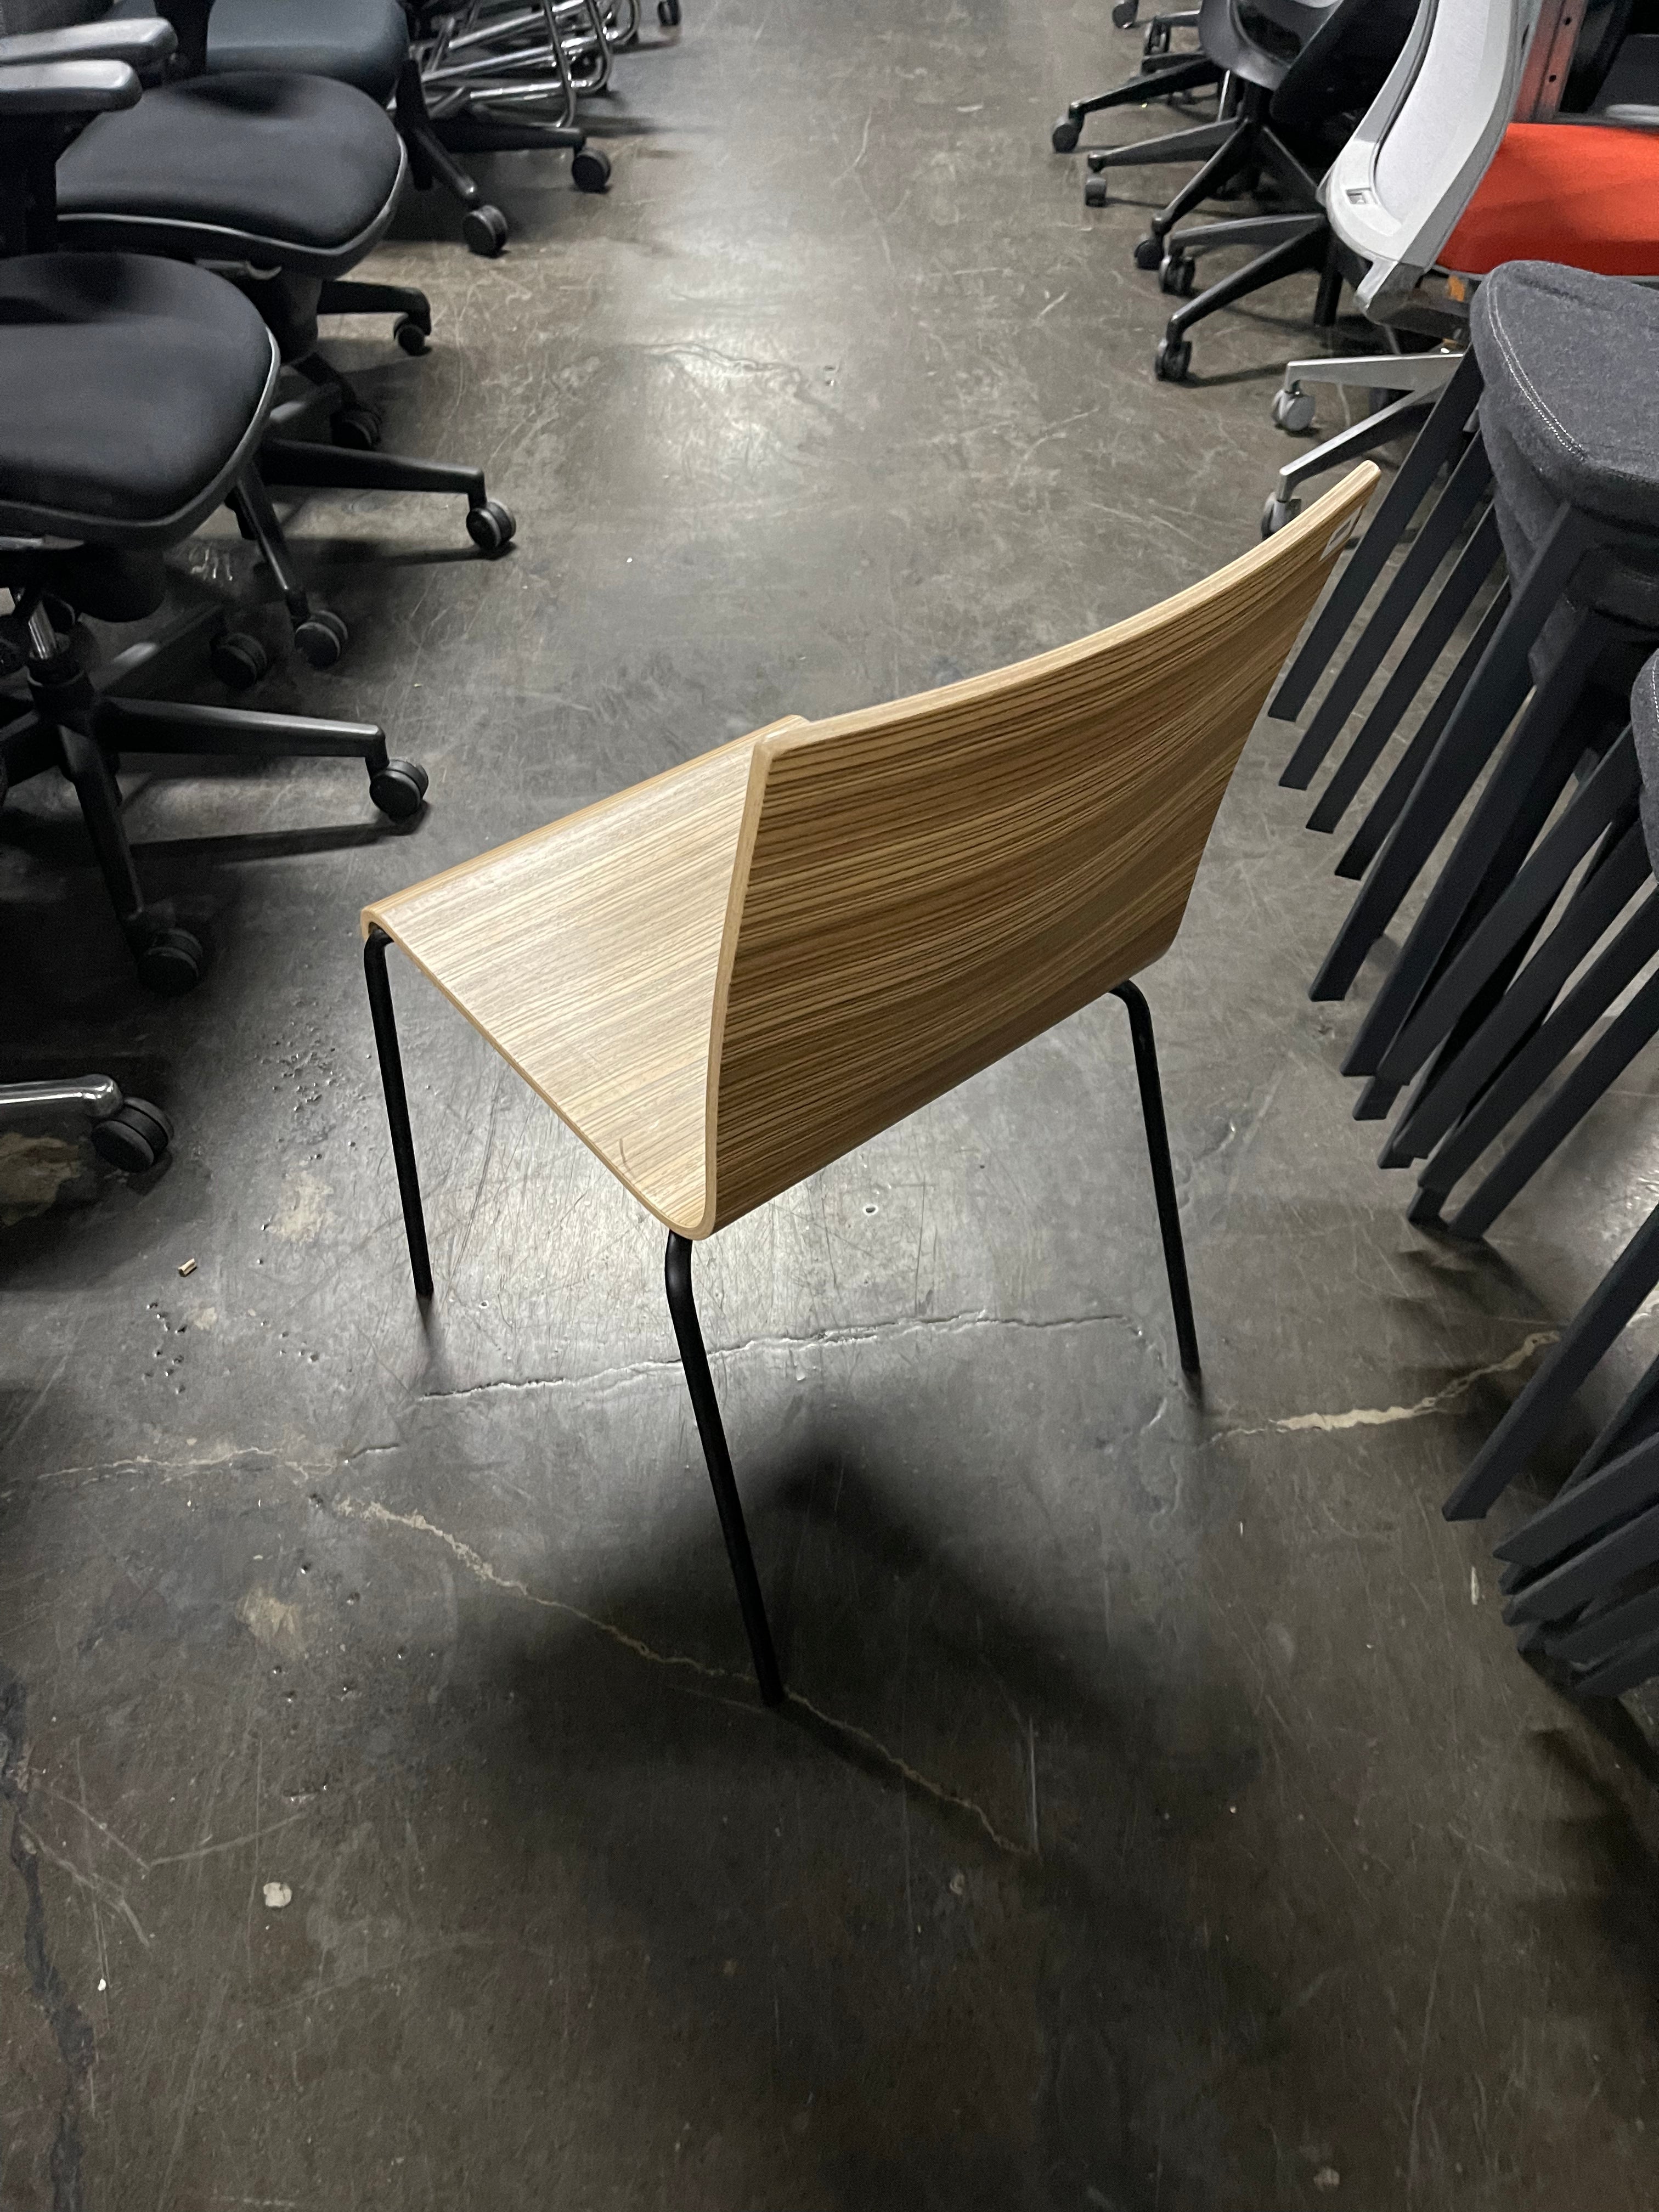 PEDRALI KUADRA 1331 MOLDED PLYWOOD CHAIRS MADE IN ITALY VITRA HERMAN MILLER KNOLL FRITZ HANSEN ARPER STEELCASE HAWORTH DESIGNER HOME OFFICE FURNITURE WHOLESALE SUPPLIER SALE CLEARANCE LUXURY PREMIUM DESIGNER CHAIRS MELBOURNE SYDNEY AUSTRALIA